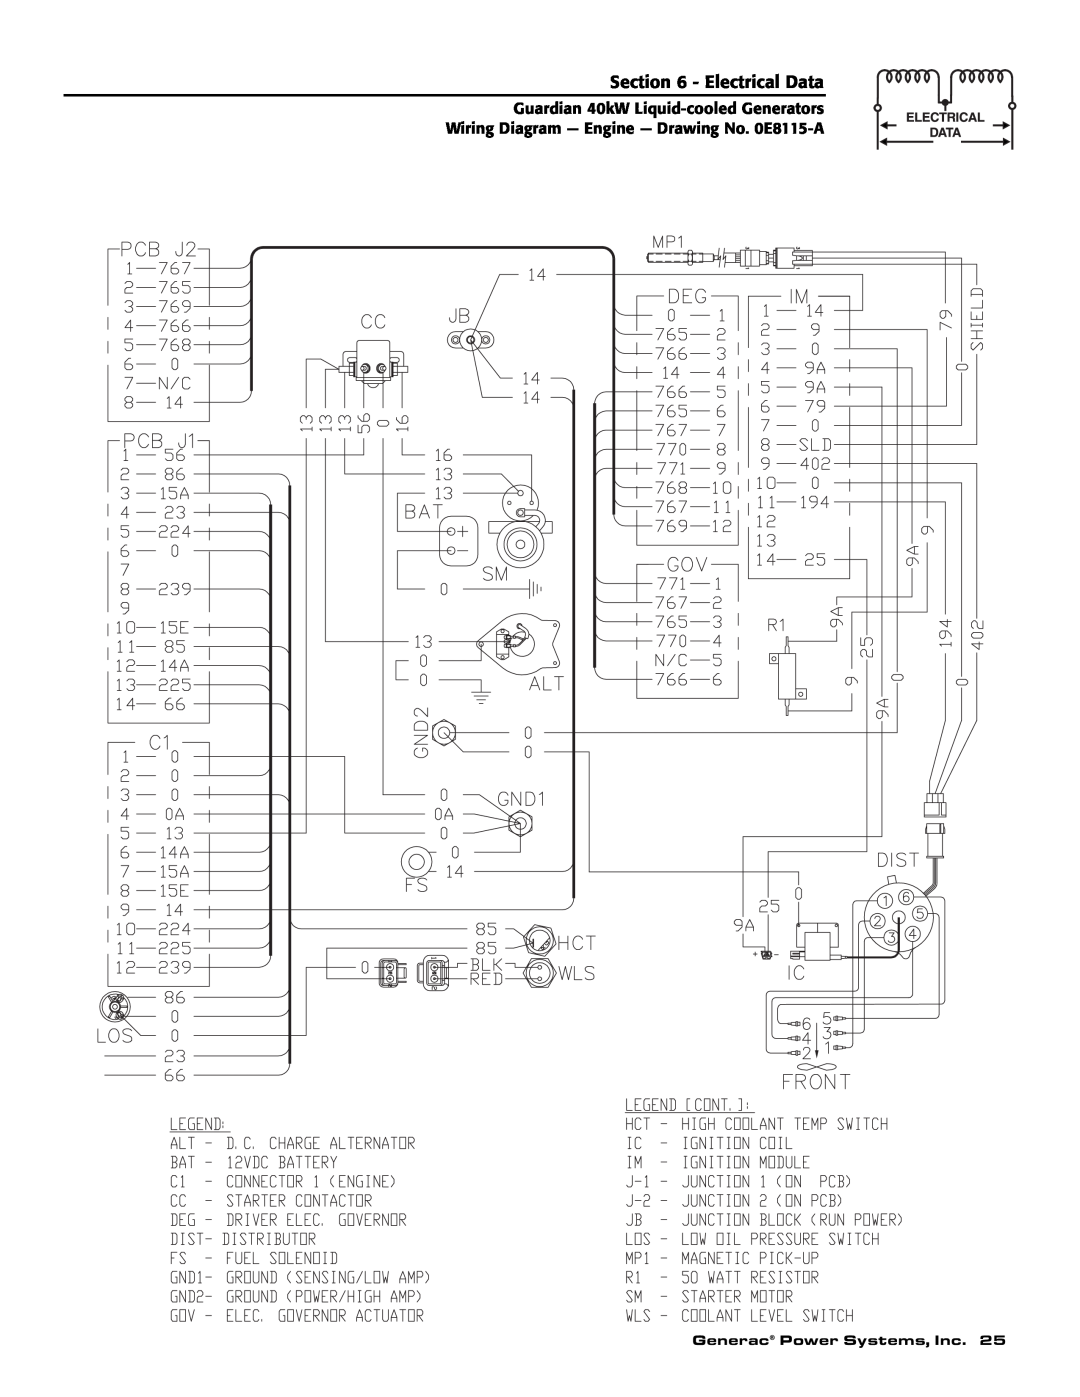 Generac Power Systems 004992-1, 004992-0, 004992-0, 004992-1 owner manual Electrical Data, Generac Power Systems, Inc 